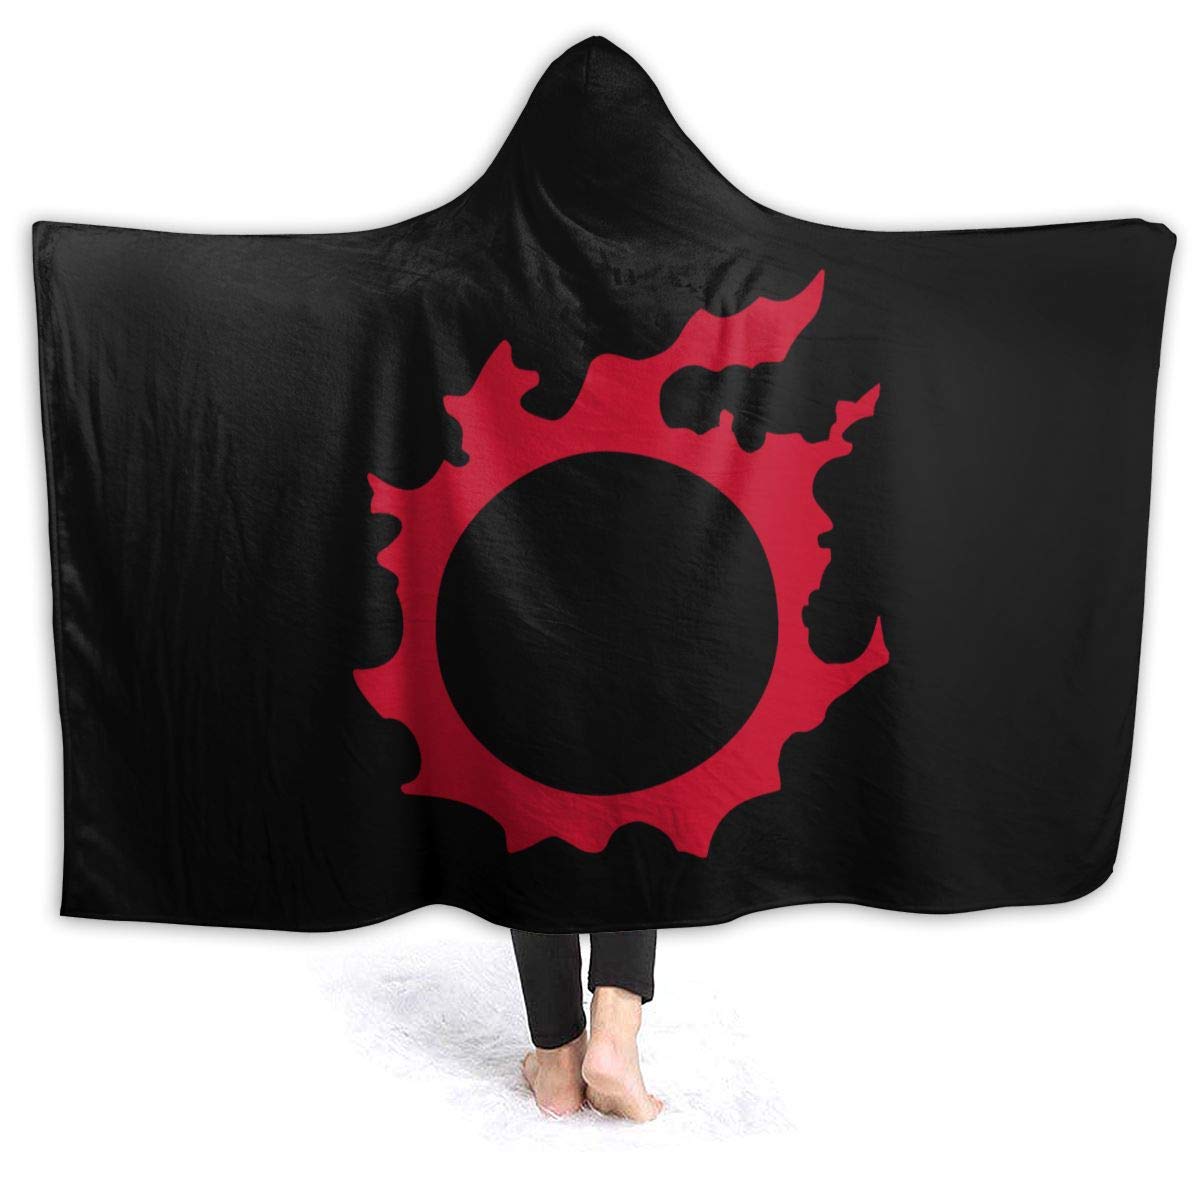 Goldeply Final Fantasy XIV Blankets with Cap Soft Blankets are Suitable for Sofas, for All Seasons,Flannel Hooded Blanket,Warm Plush Microfiber Bla...